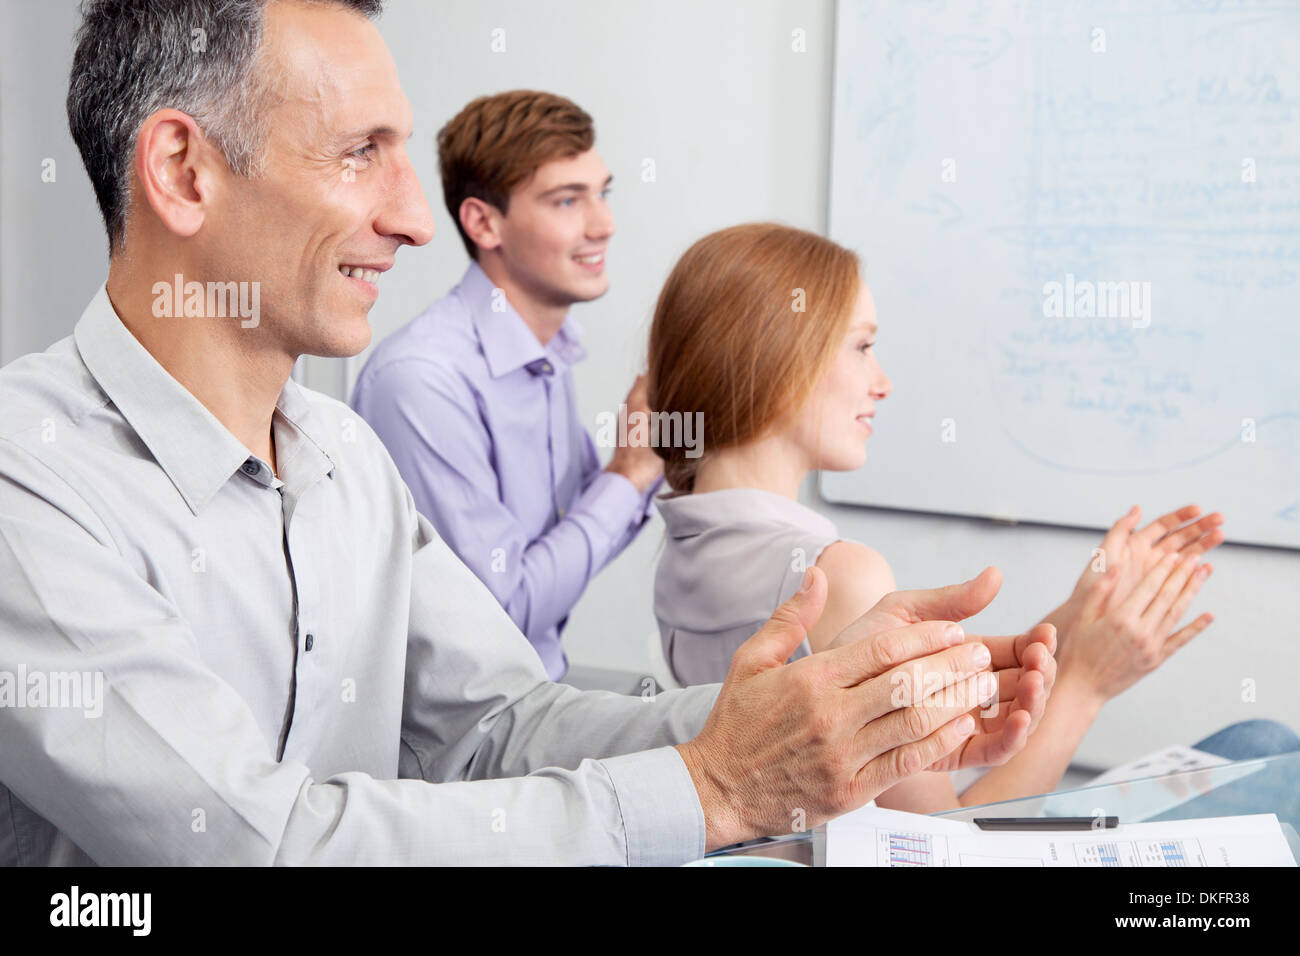 Business colleagues clapping in meeting Stock Photo